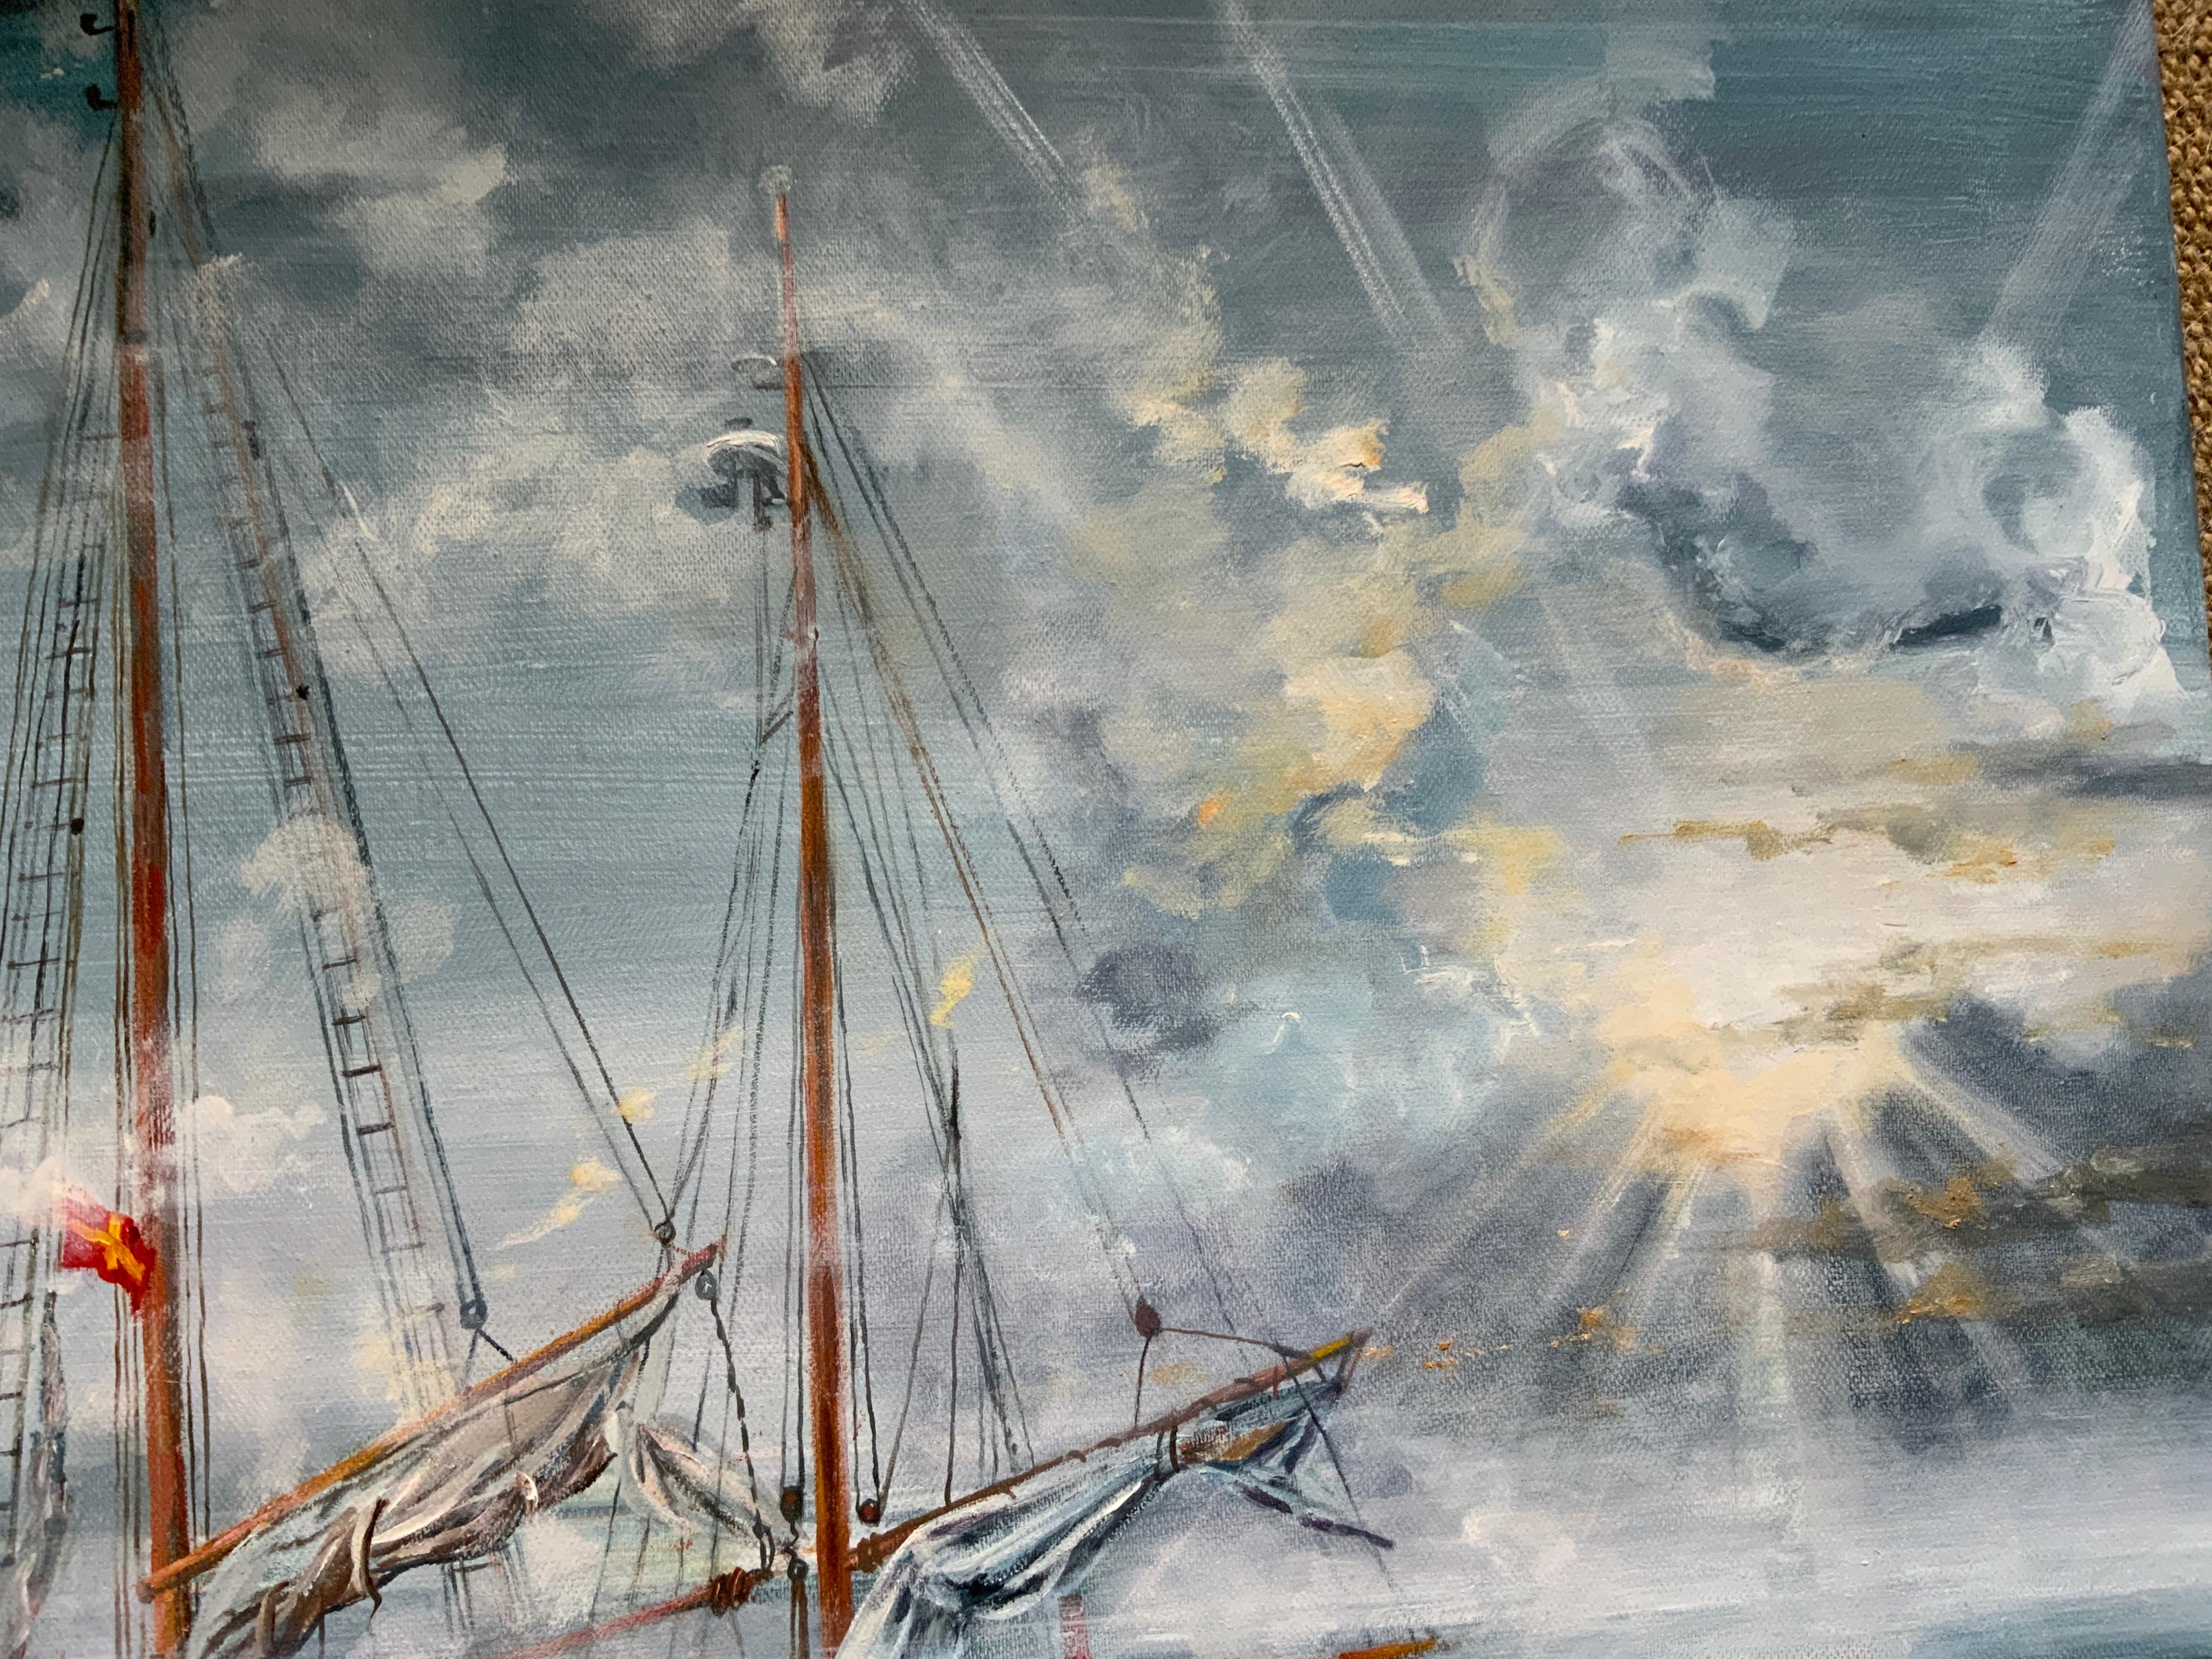 My ship is a hymn to individuality and personal freedom. It seems to me that this is especially relevant now, in our time. At the same time, the painting is made in soft, calm tones. The beauty of a carefully painted ship rivals the beauty and